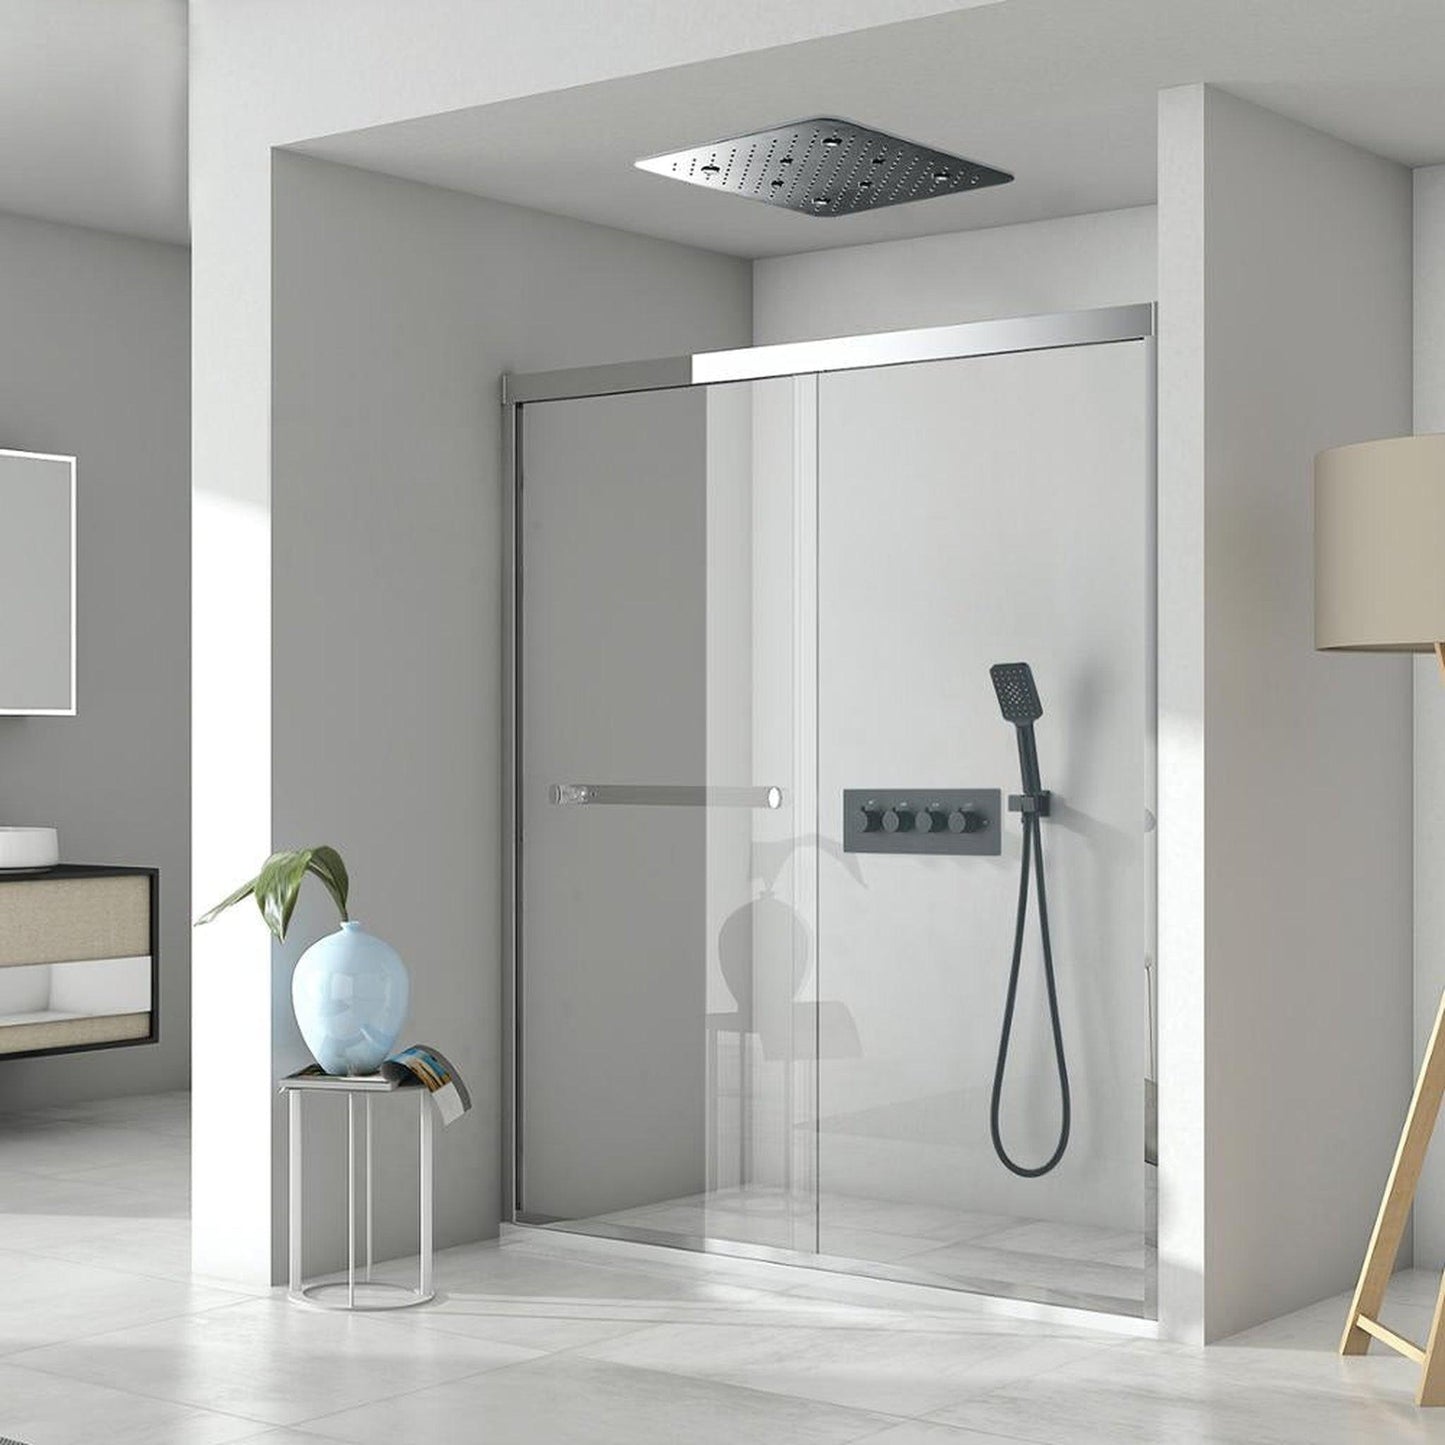 Fontana St. Gallen Matte Black Square Ceiling Mounted Multifunction Thermostatic LED Bathroom Shower Set With Hand Shower